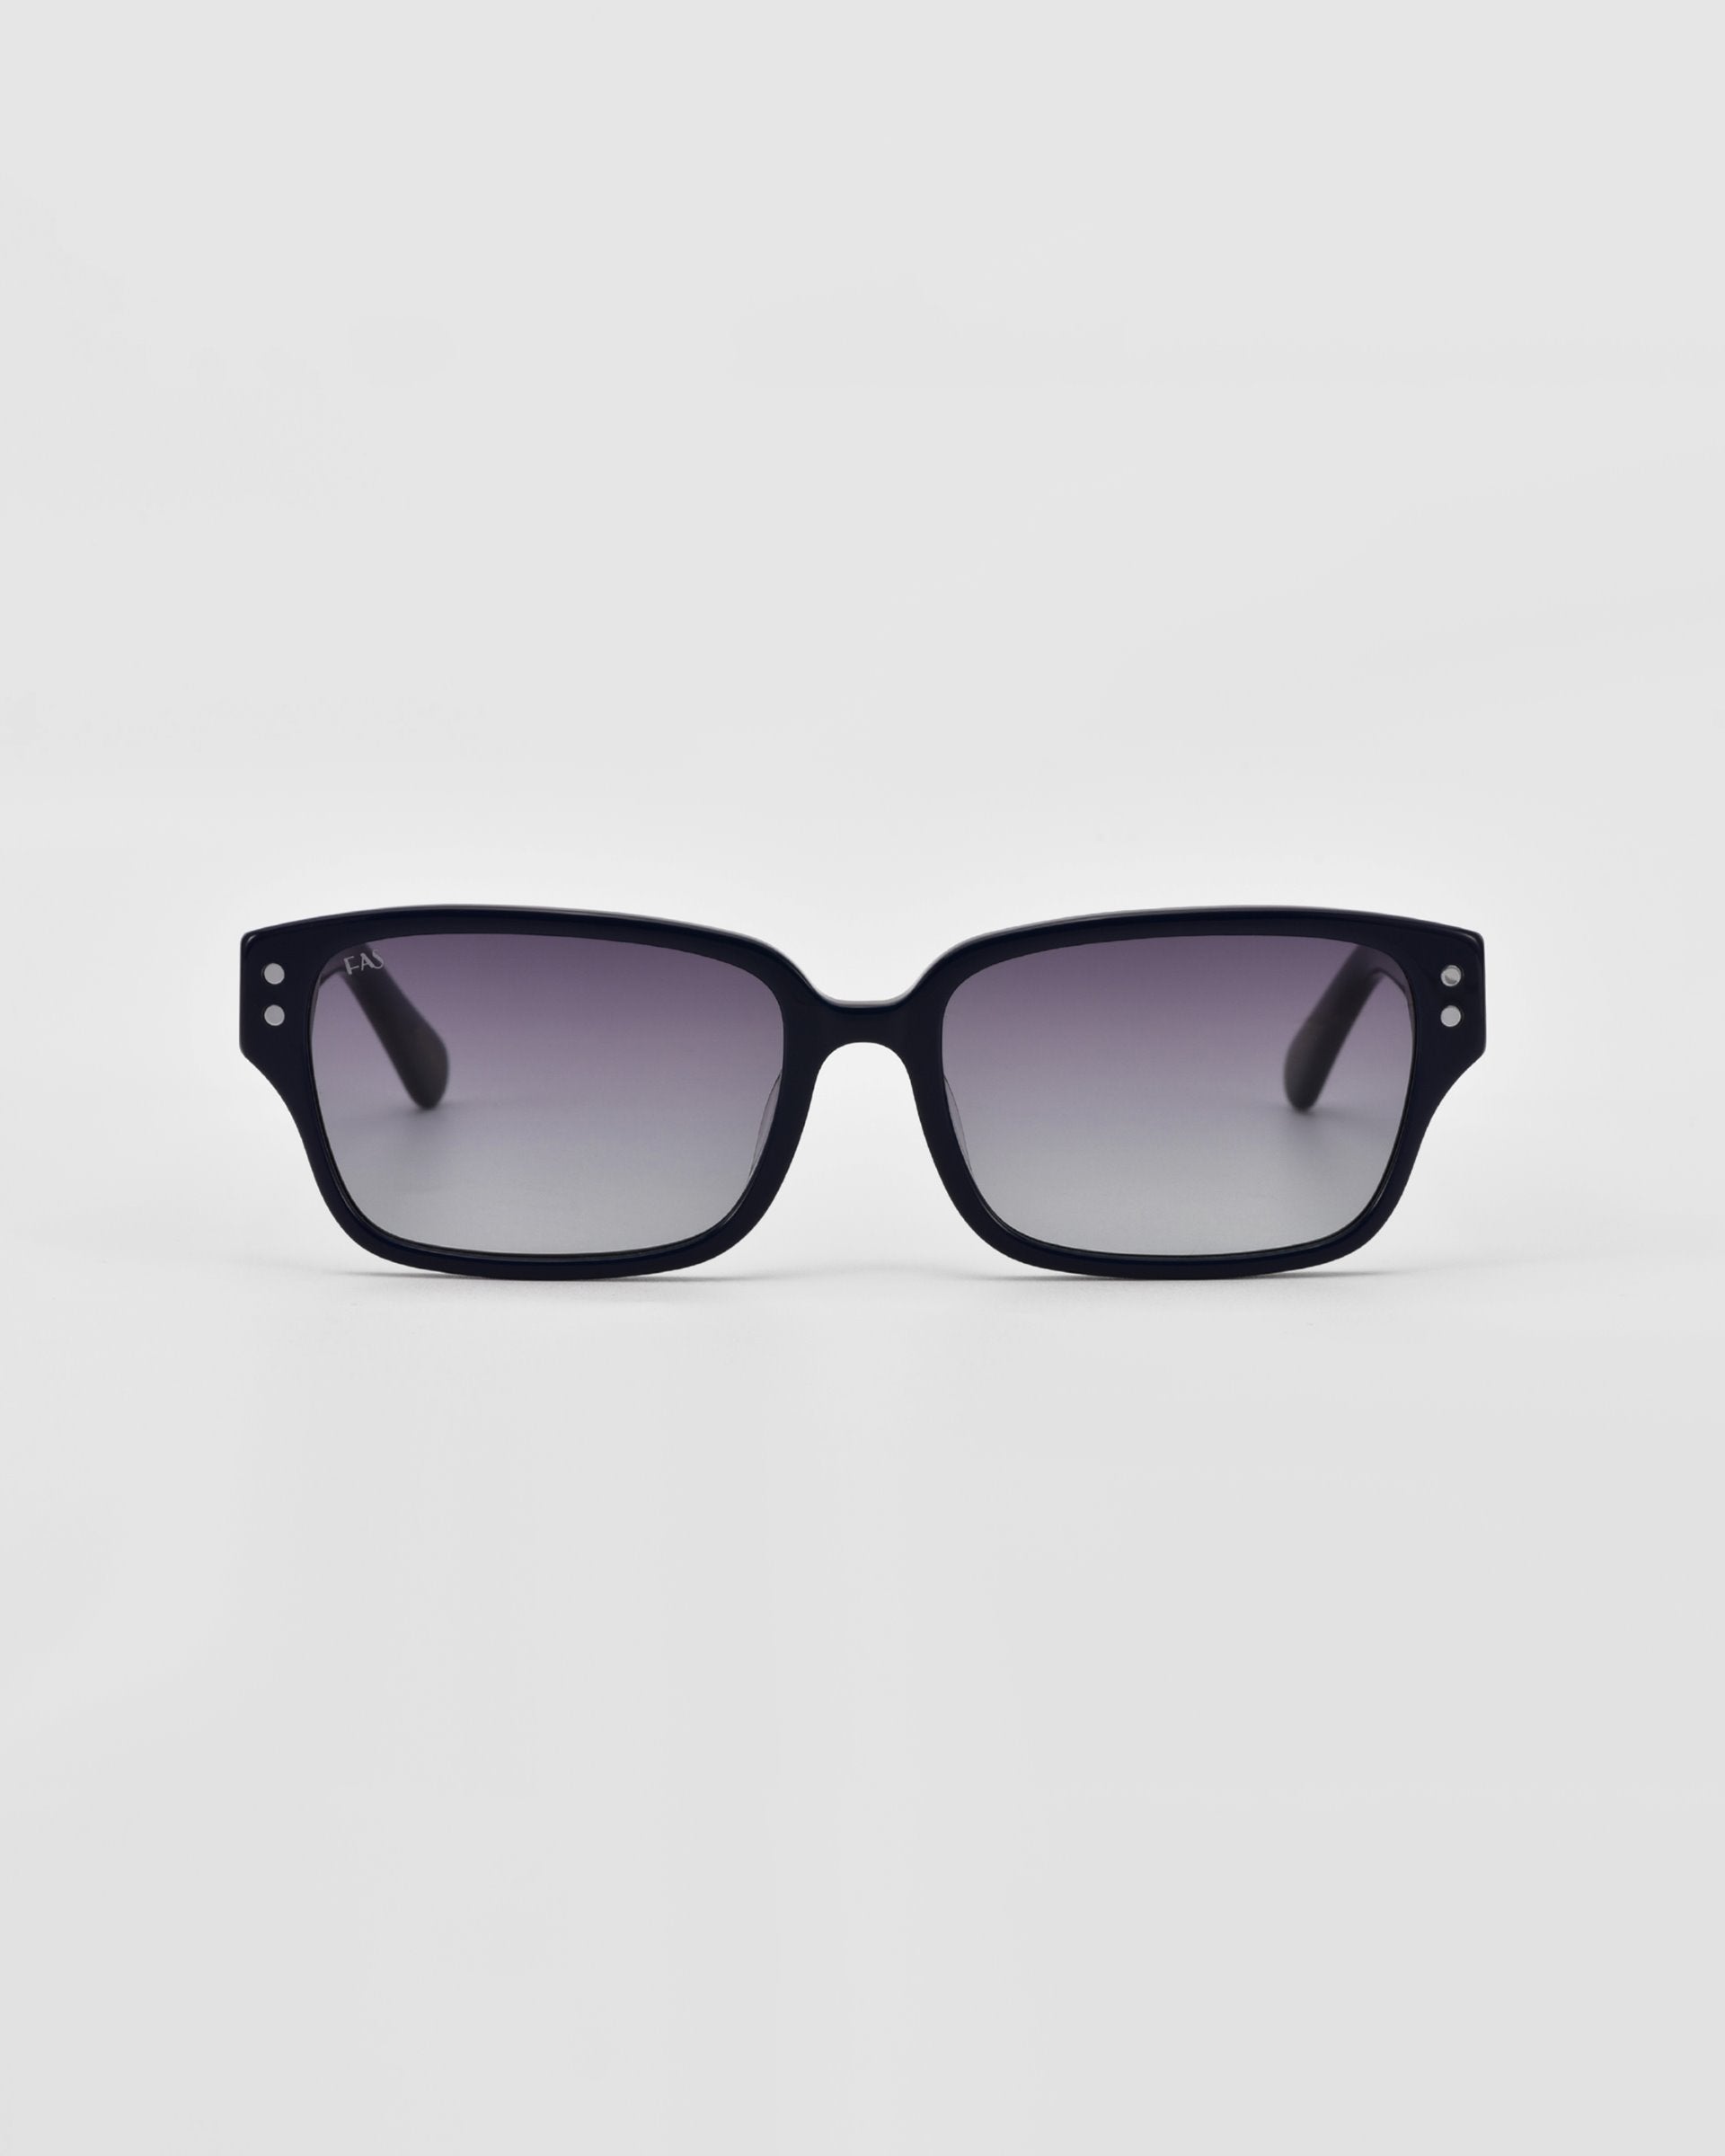 A pair of For Art's Sake® Zenith sunglasses with black rectangular frames made from handcrafted acetate stand against a plain, light grey background. Enhanced with sleek, slightly curved lines and chunky chain detailing, they exude a modern, stylish look.